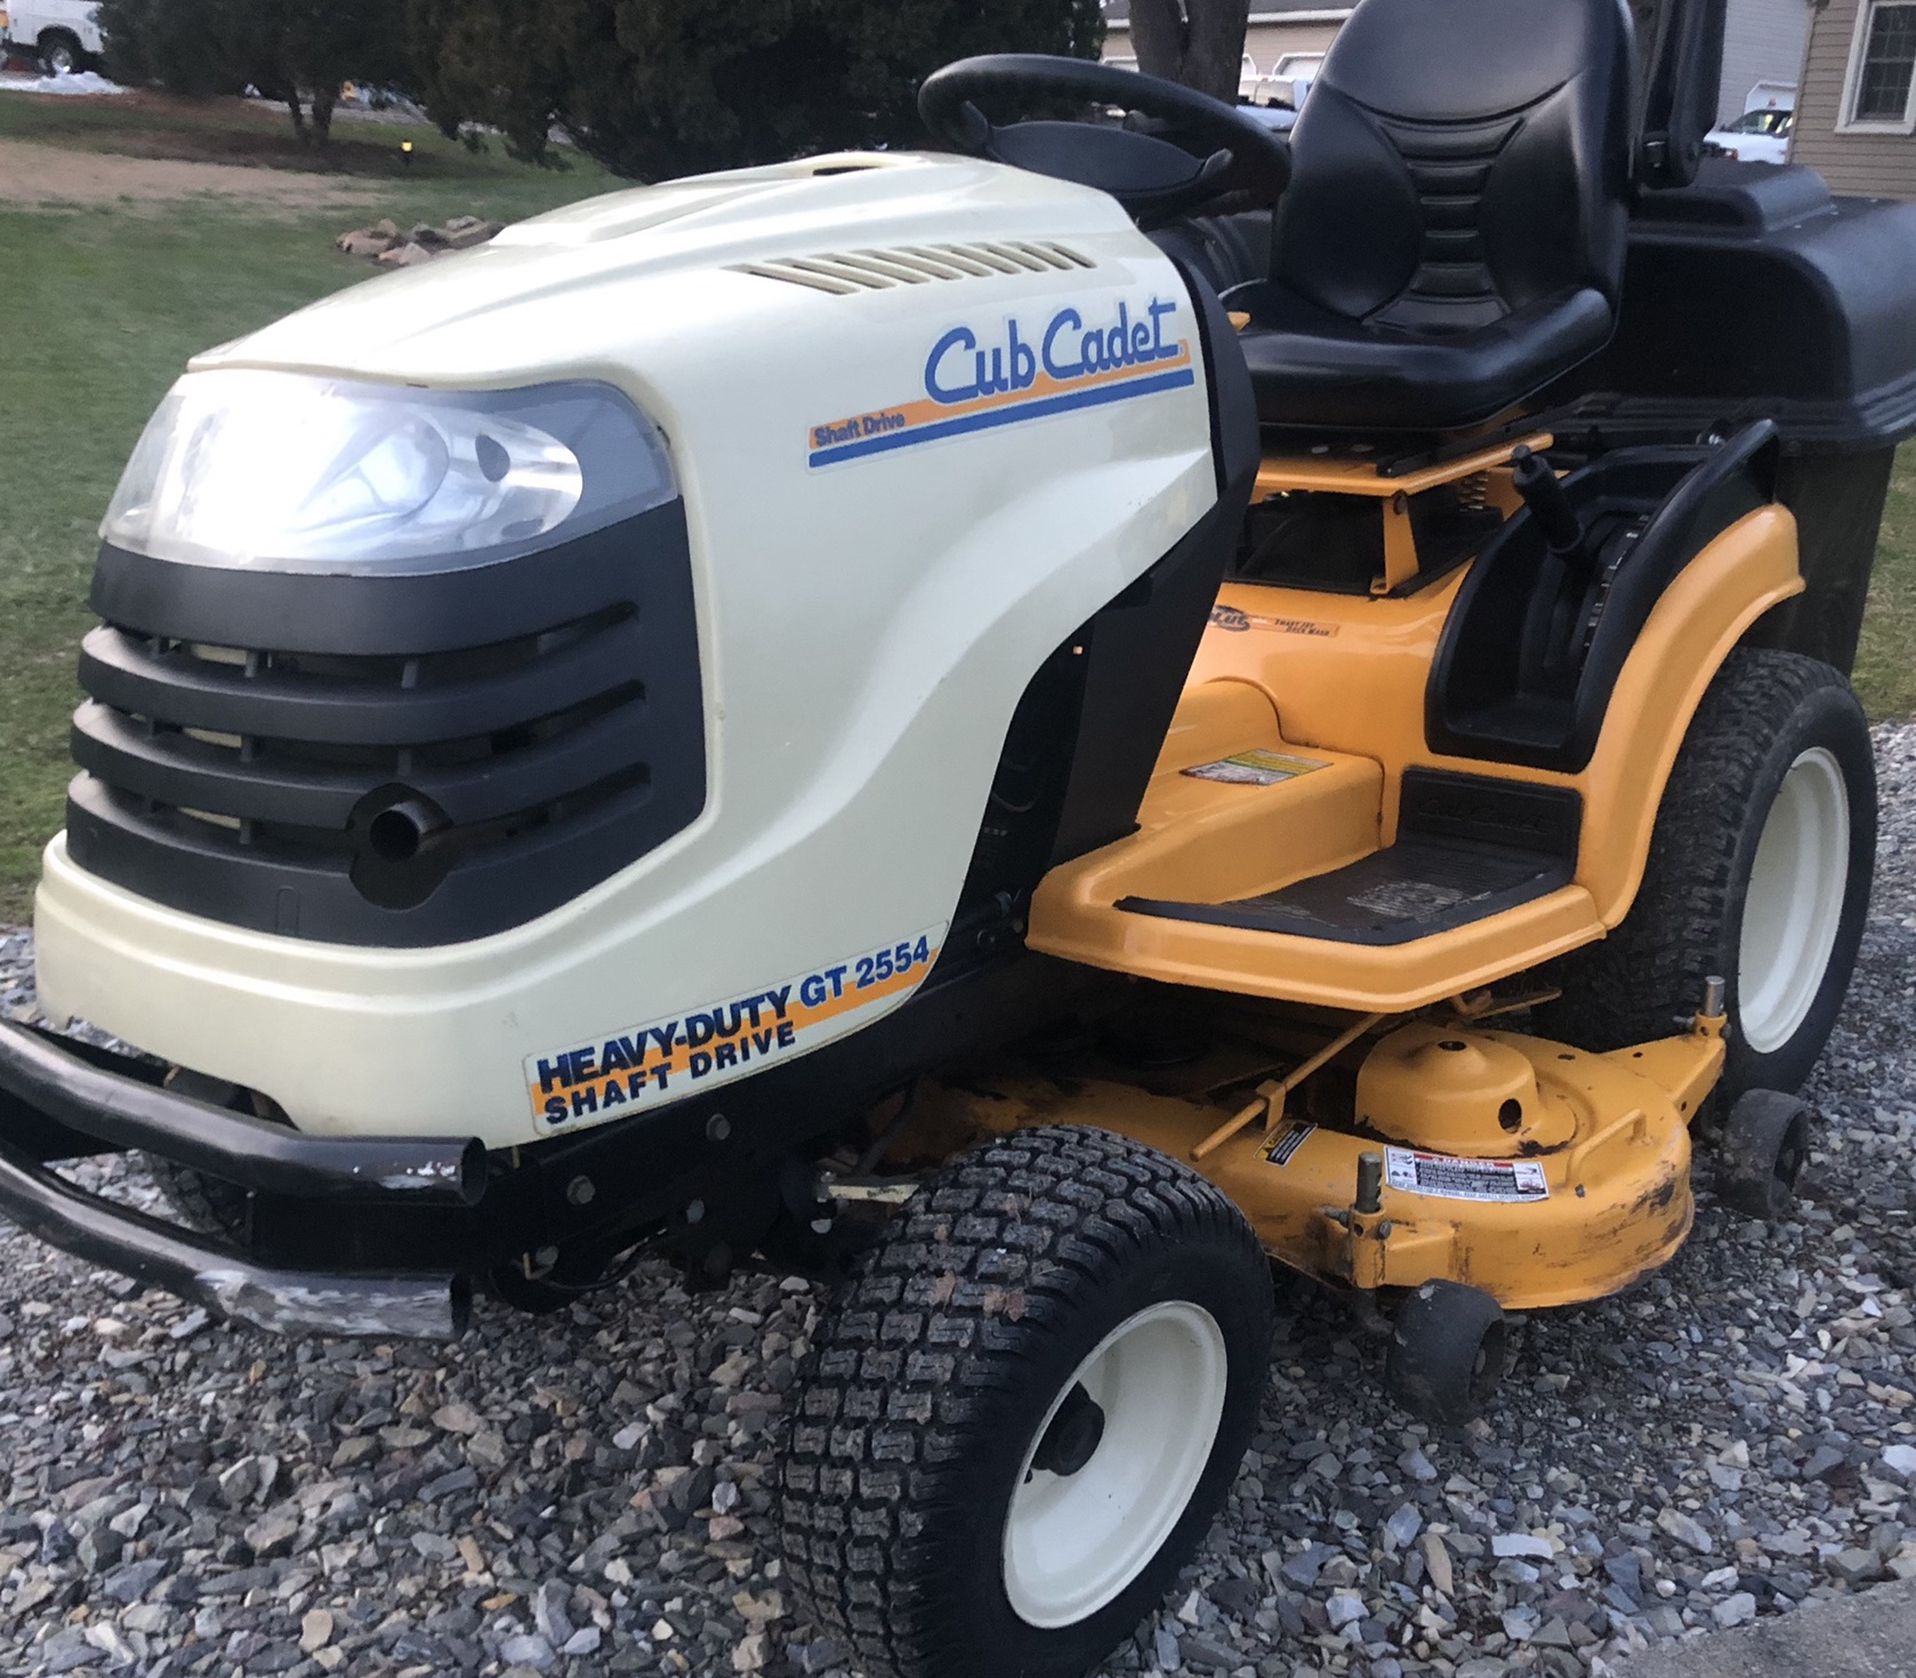 Cub Cadet Gt2554 Garden Tractor Mower With Bagger For Sale In